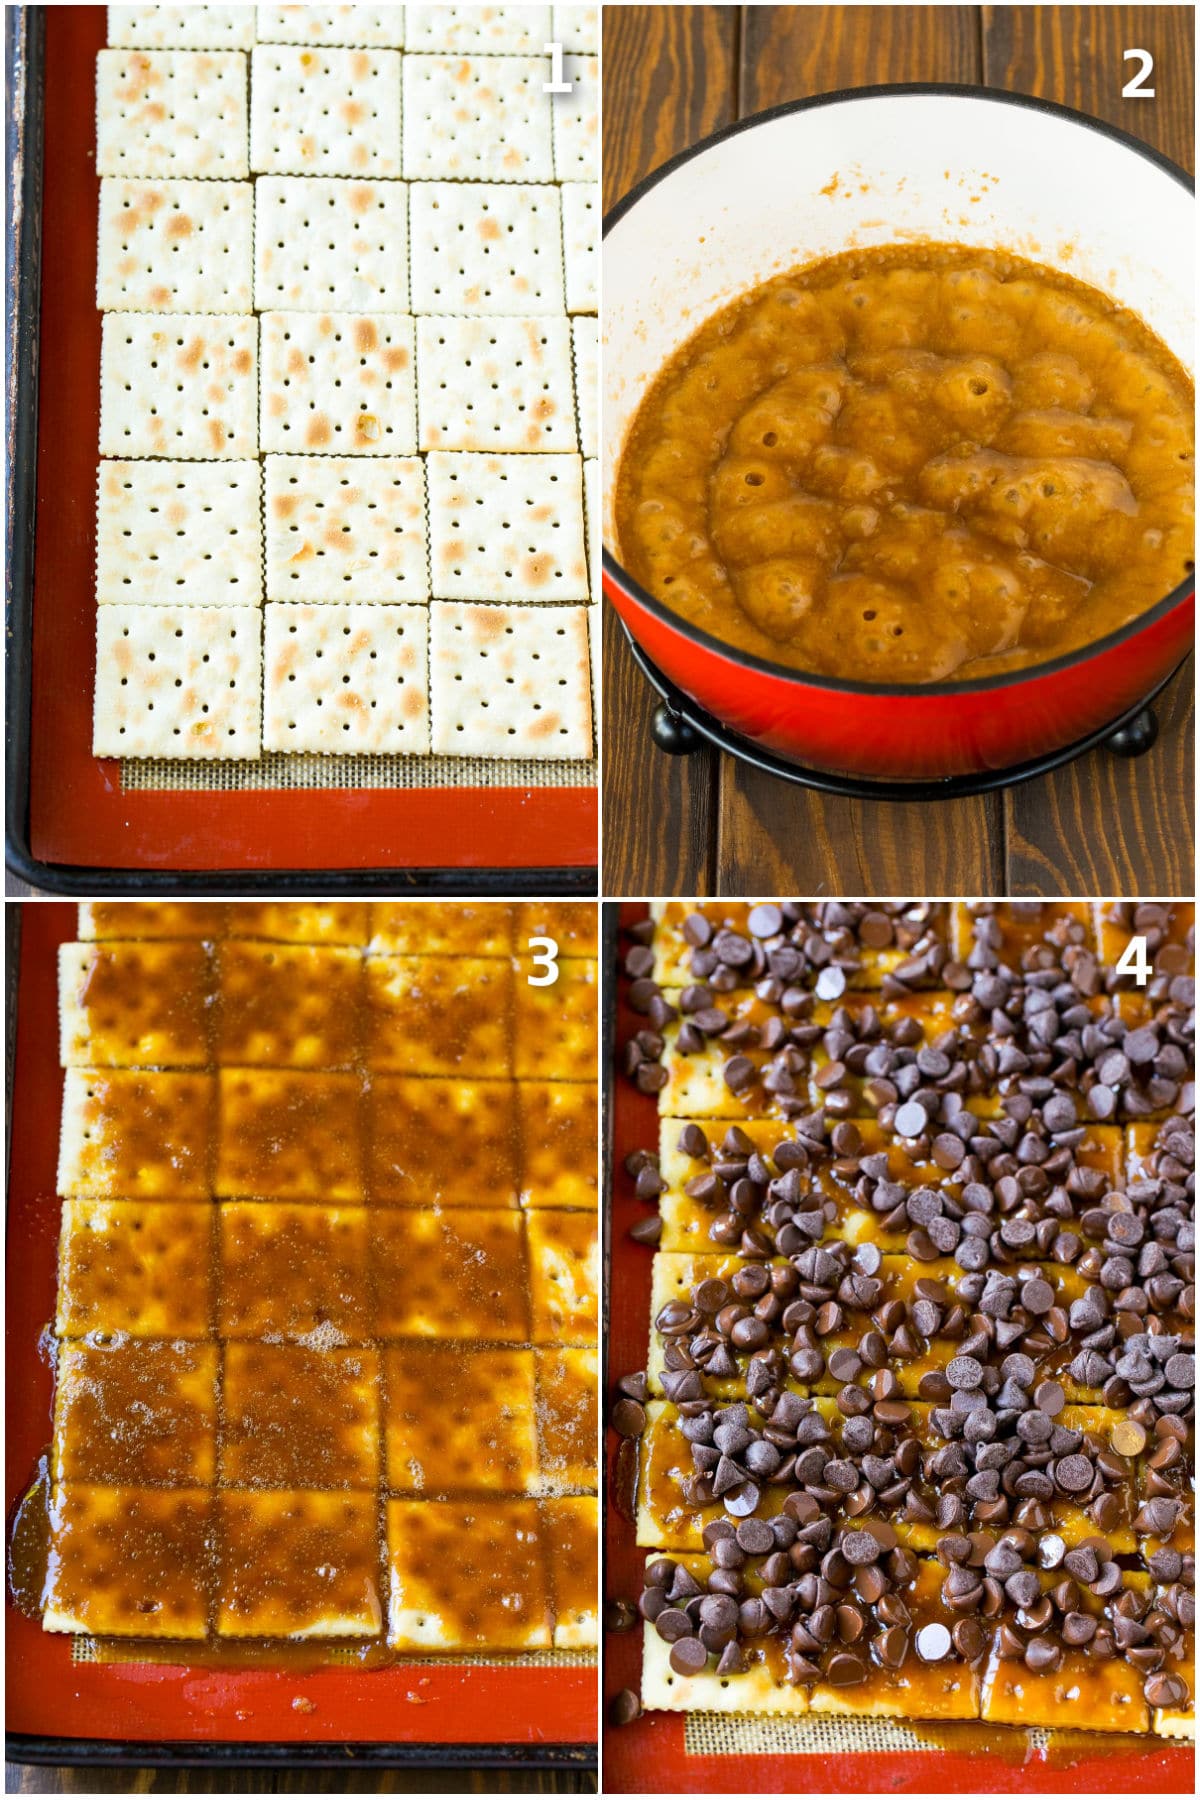 Step by step process shots showing how to make Christmas crack.